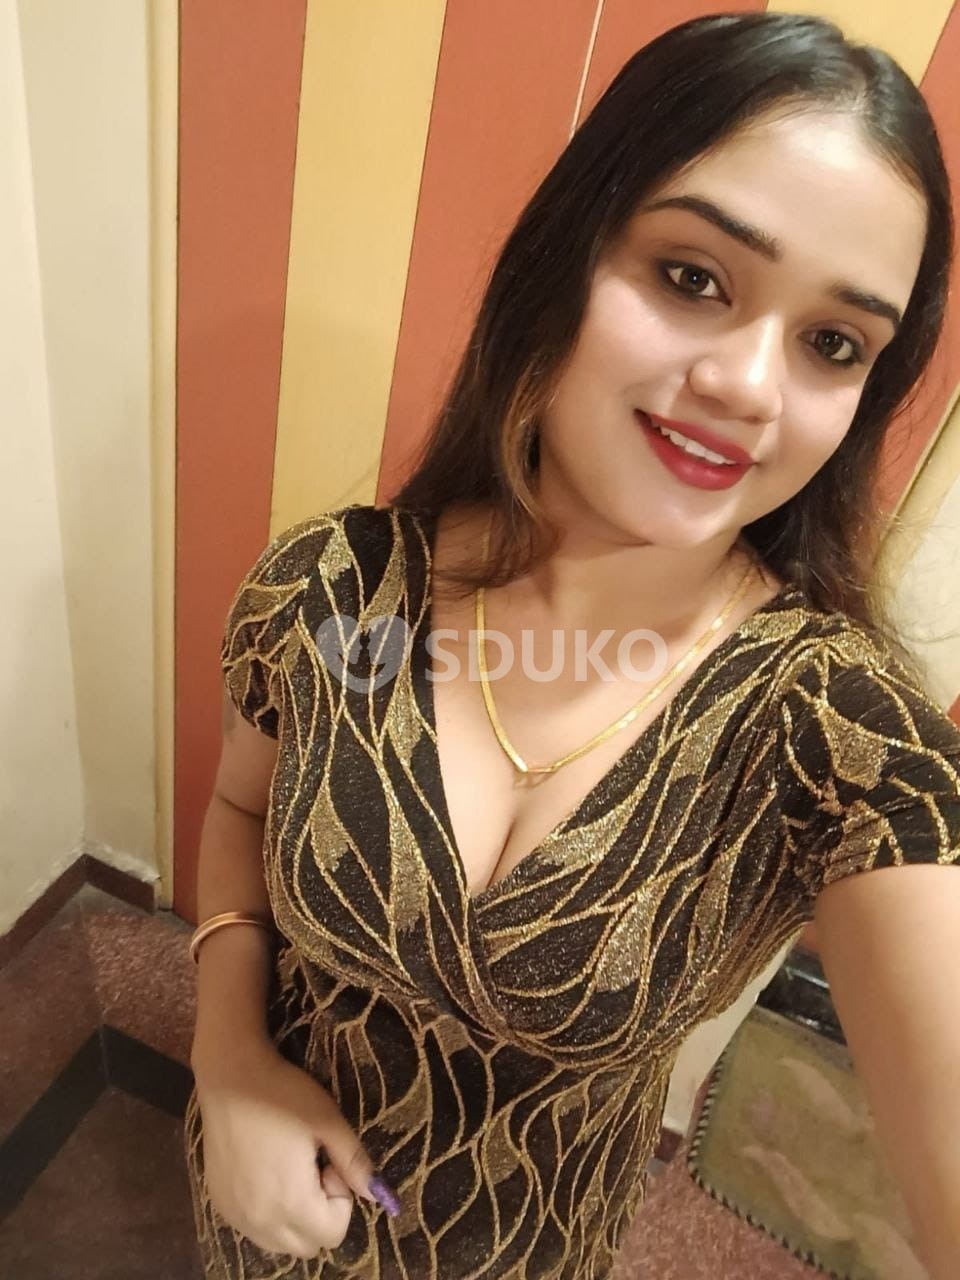 DURGAPUR ⭐💯TODAY LOW PRICE 100% SAFE AND SECURE GENUINE CALL GIRL AFFORDABLE PRICE &&&&..CALL NOW